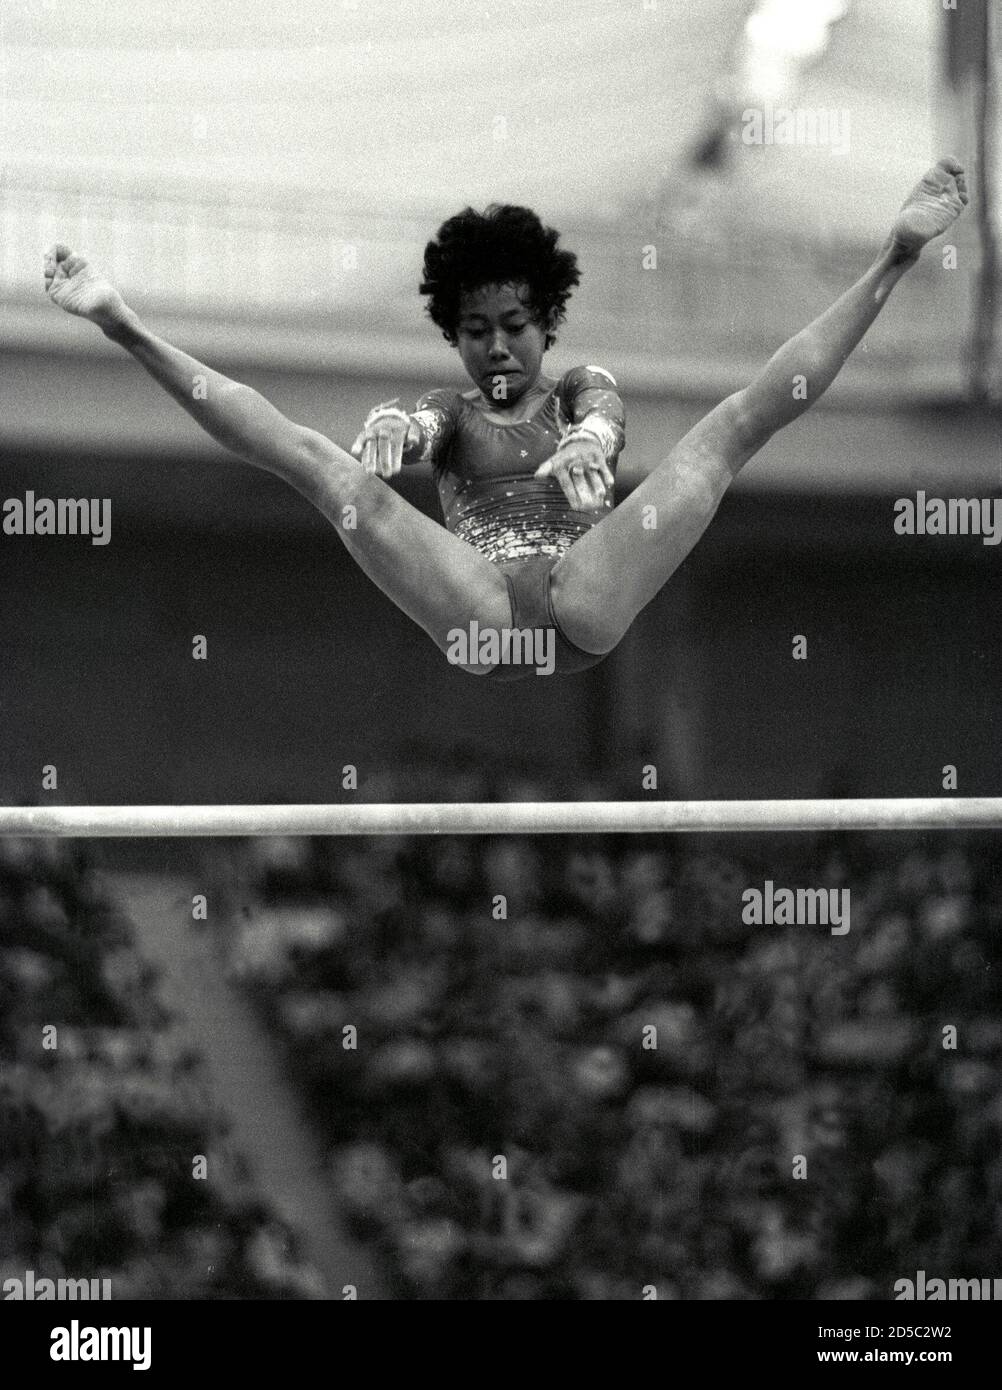 Indonesia's Woro Endang Werdiningsih leaps backwards as she catches the bar during her routine on the uneven bars September 22, 1986 at the women's gymnastics team event of the Asian Games in Seoul. SCANNED FROM NEGATIVE. REUTERS/Shunsuke Akatsuka  GDB/CMC/PN Stock Photo